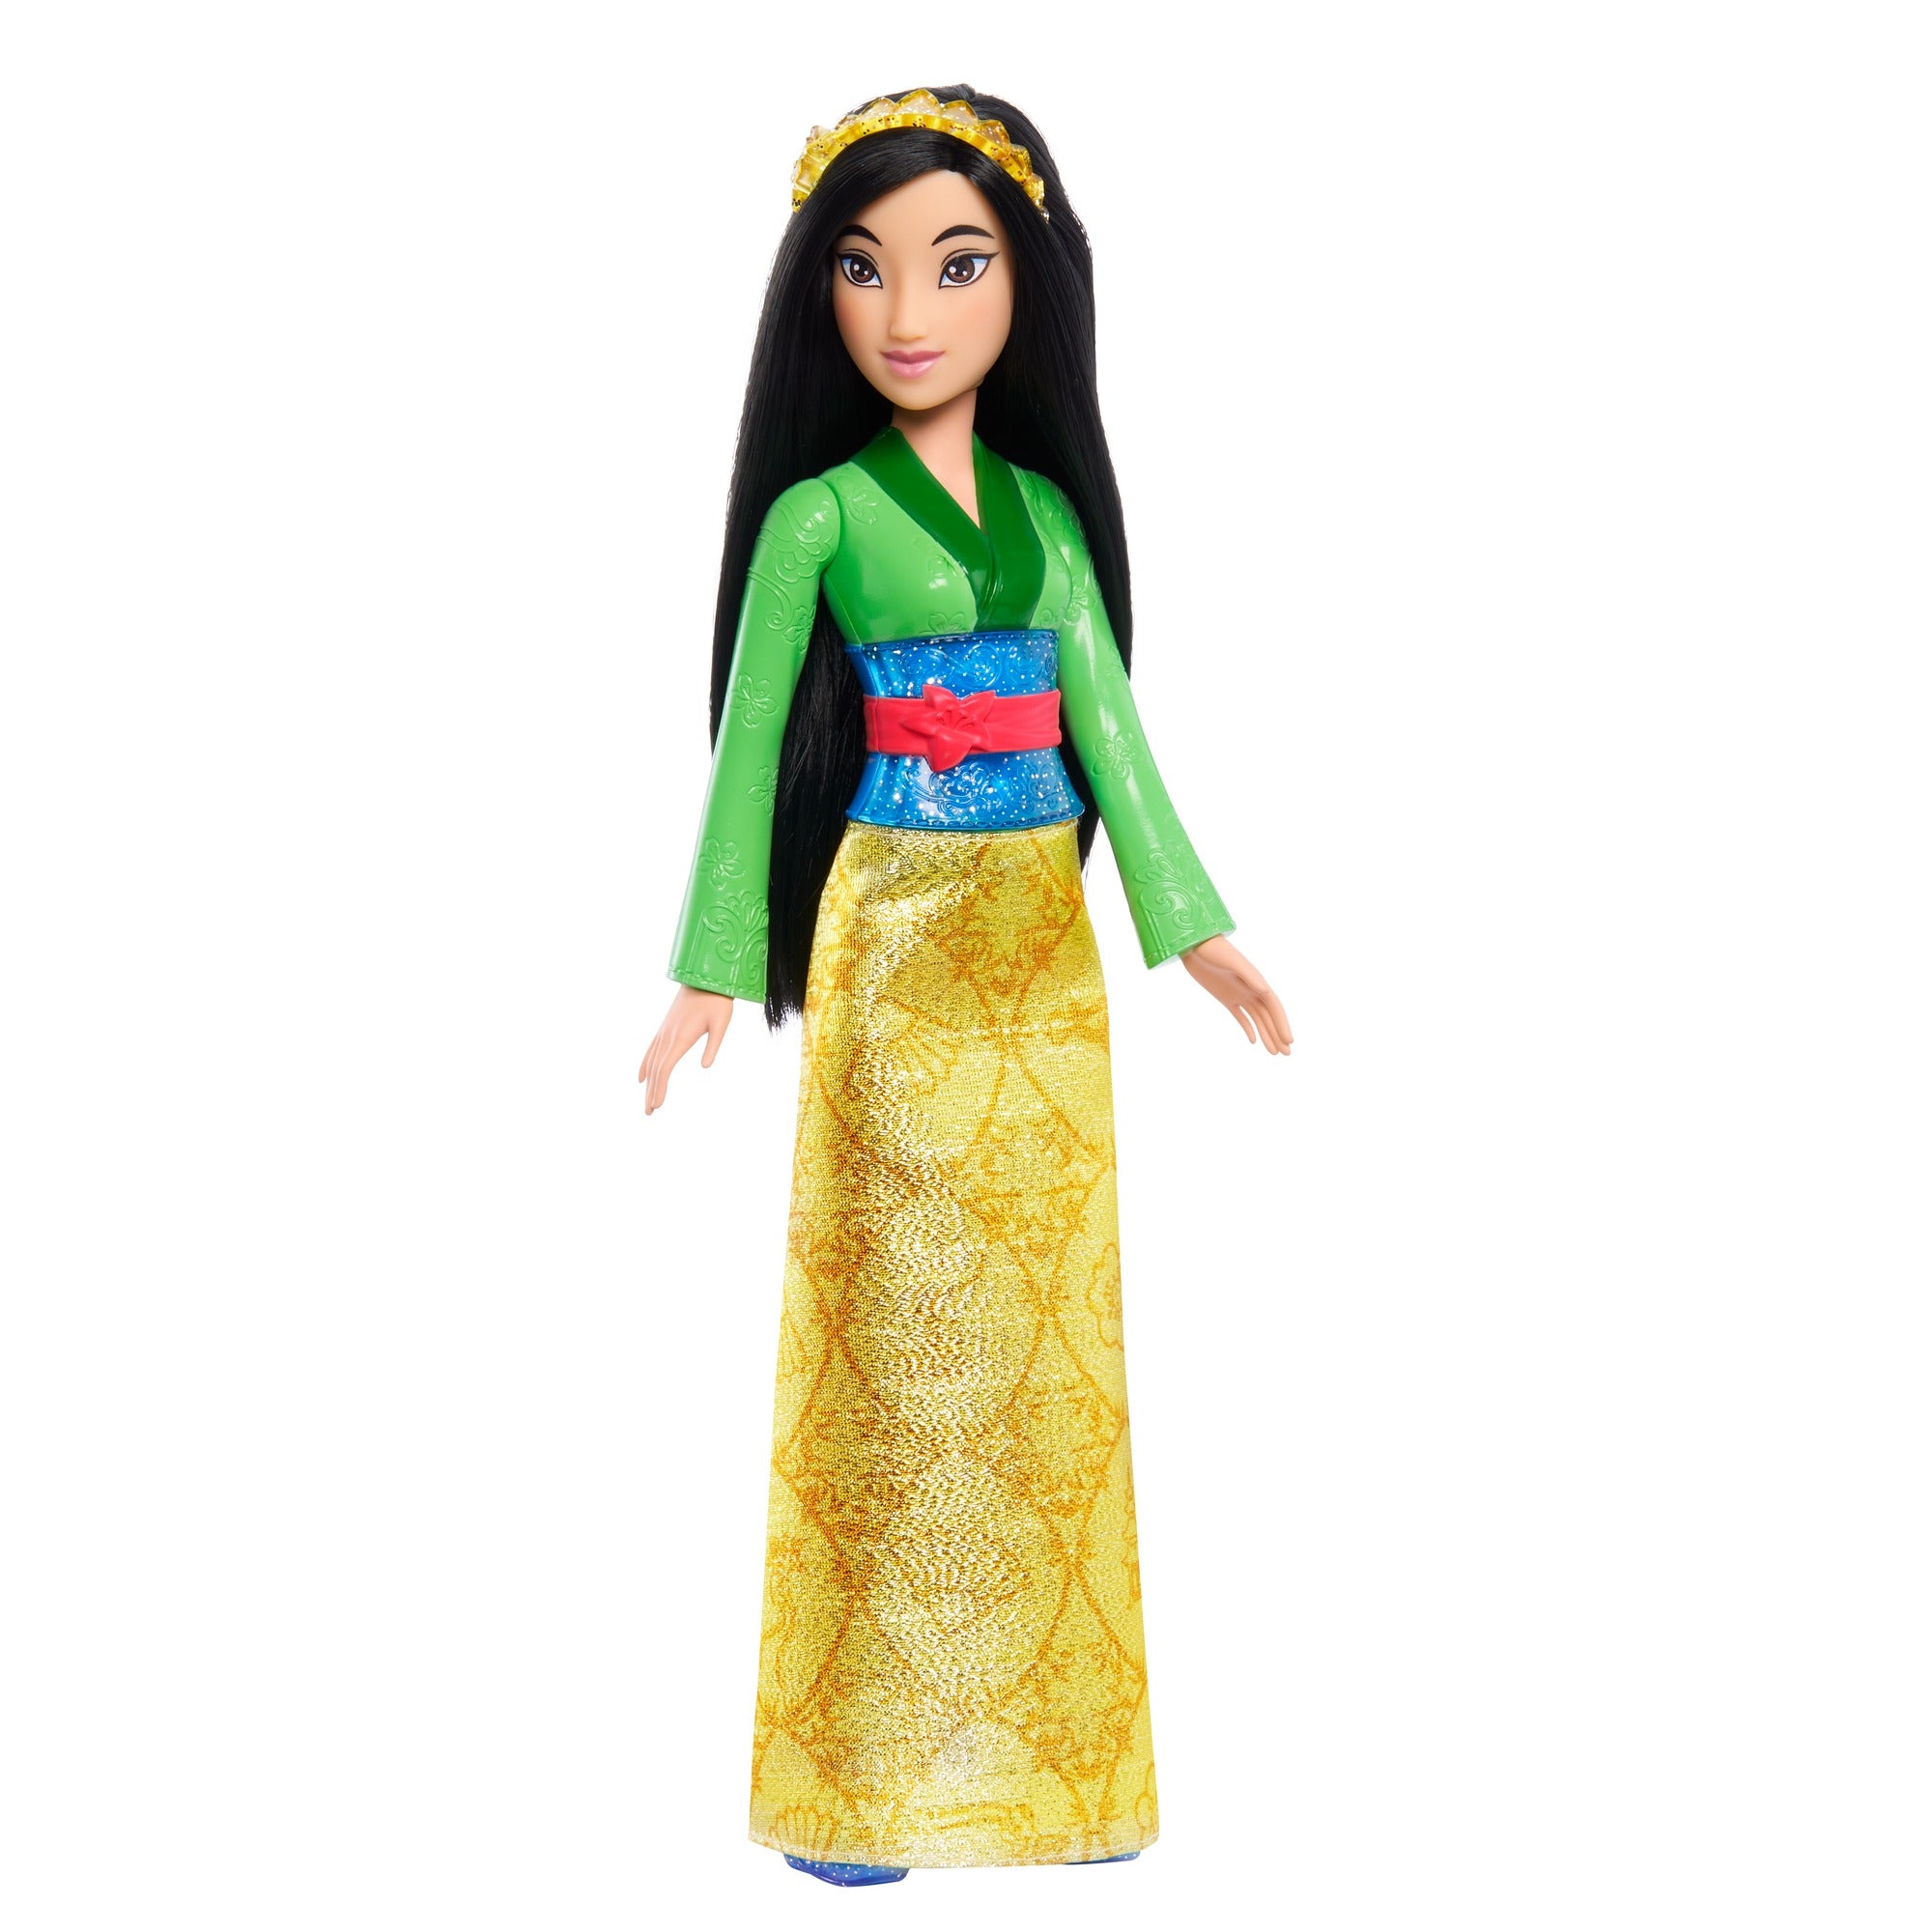 Disney Princess Mulan Posable Fashion Doll with Sparkling Clothing and Accessories for Kids Ages 3+